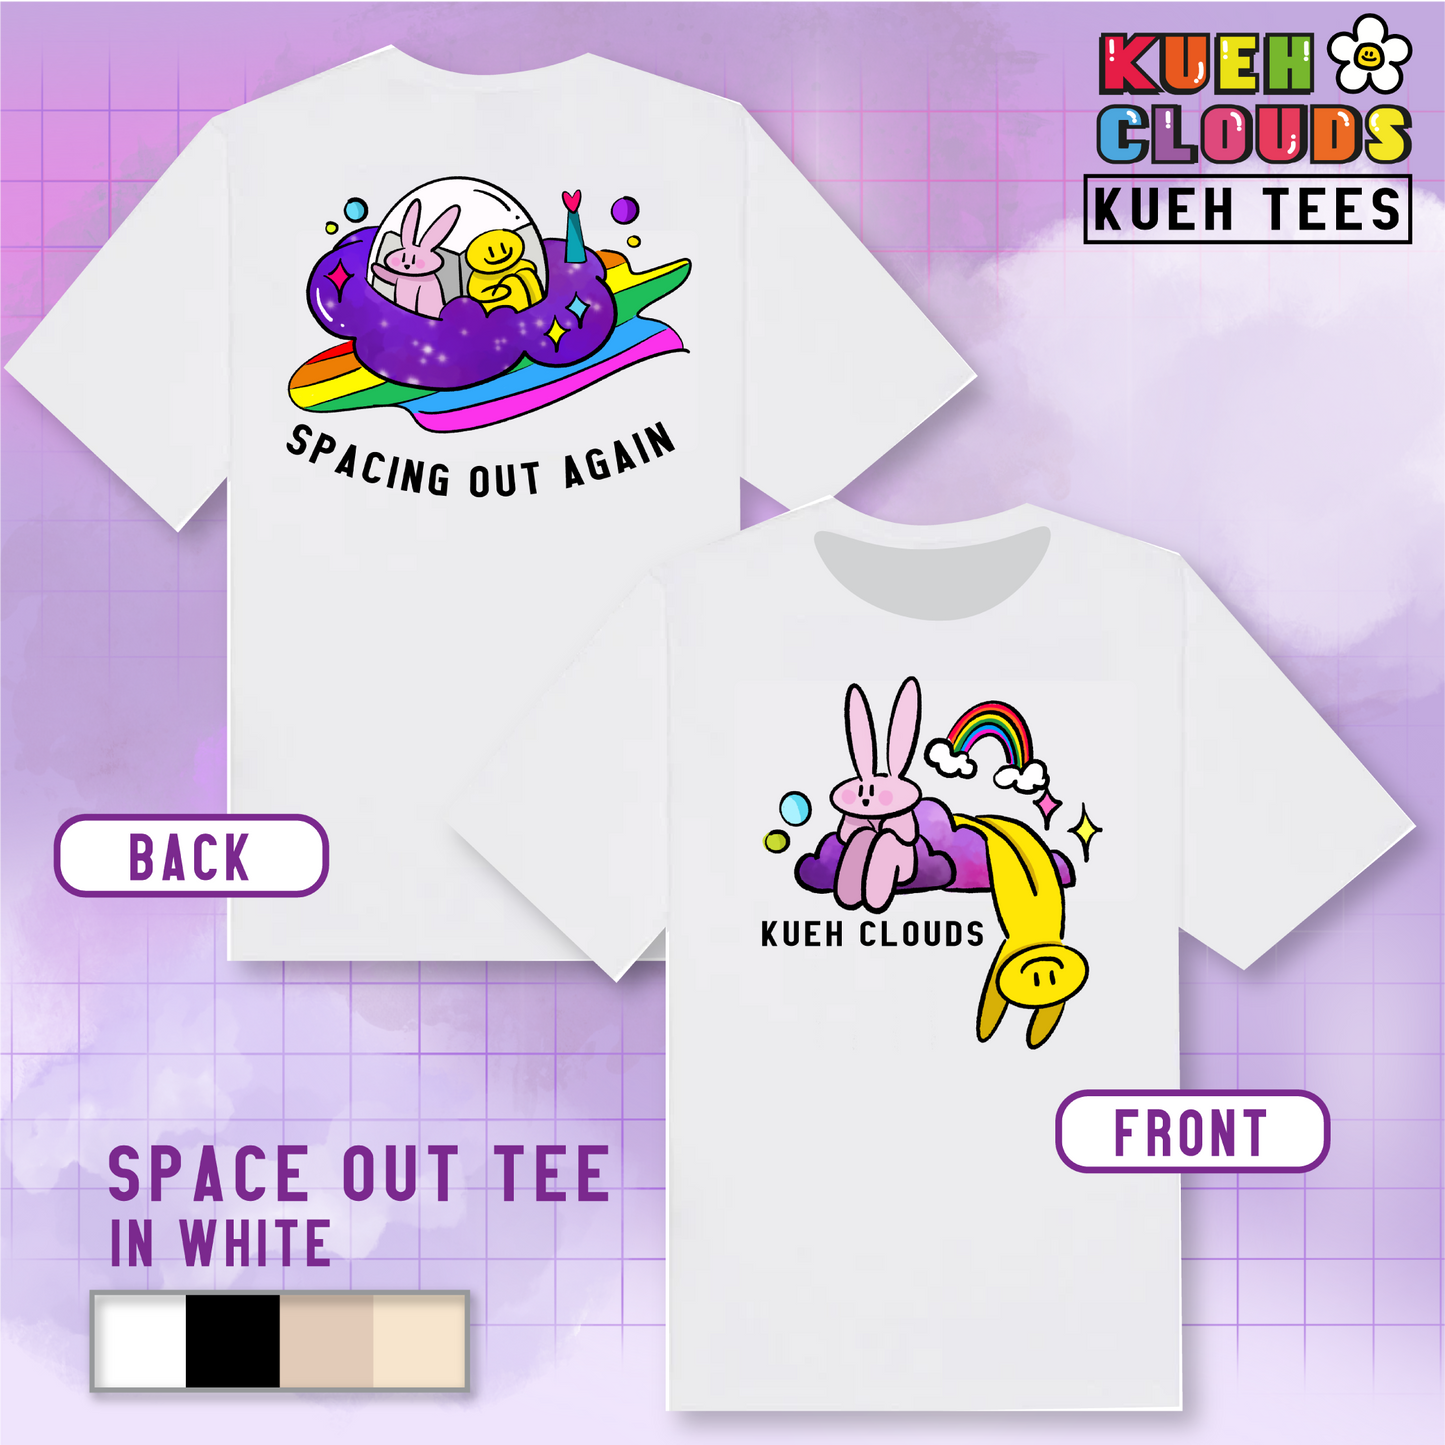 SPACE OUT TEE